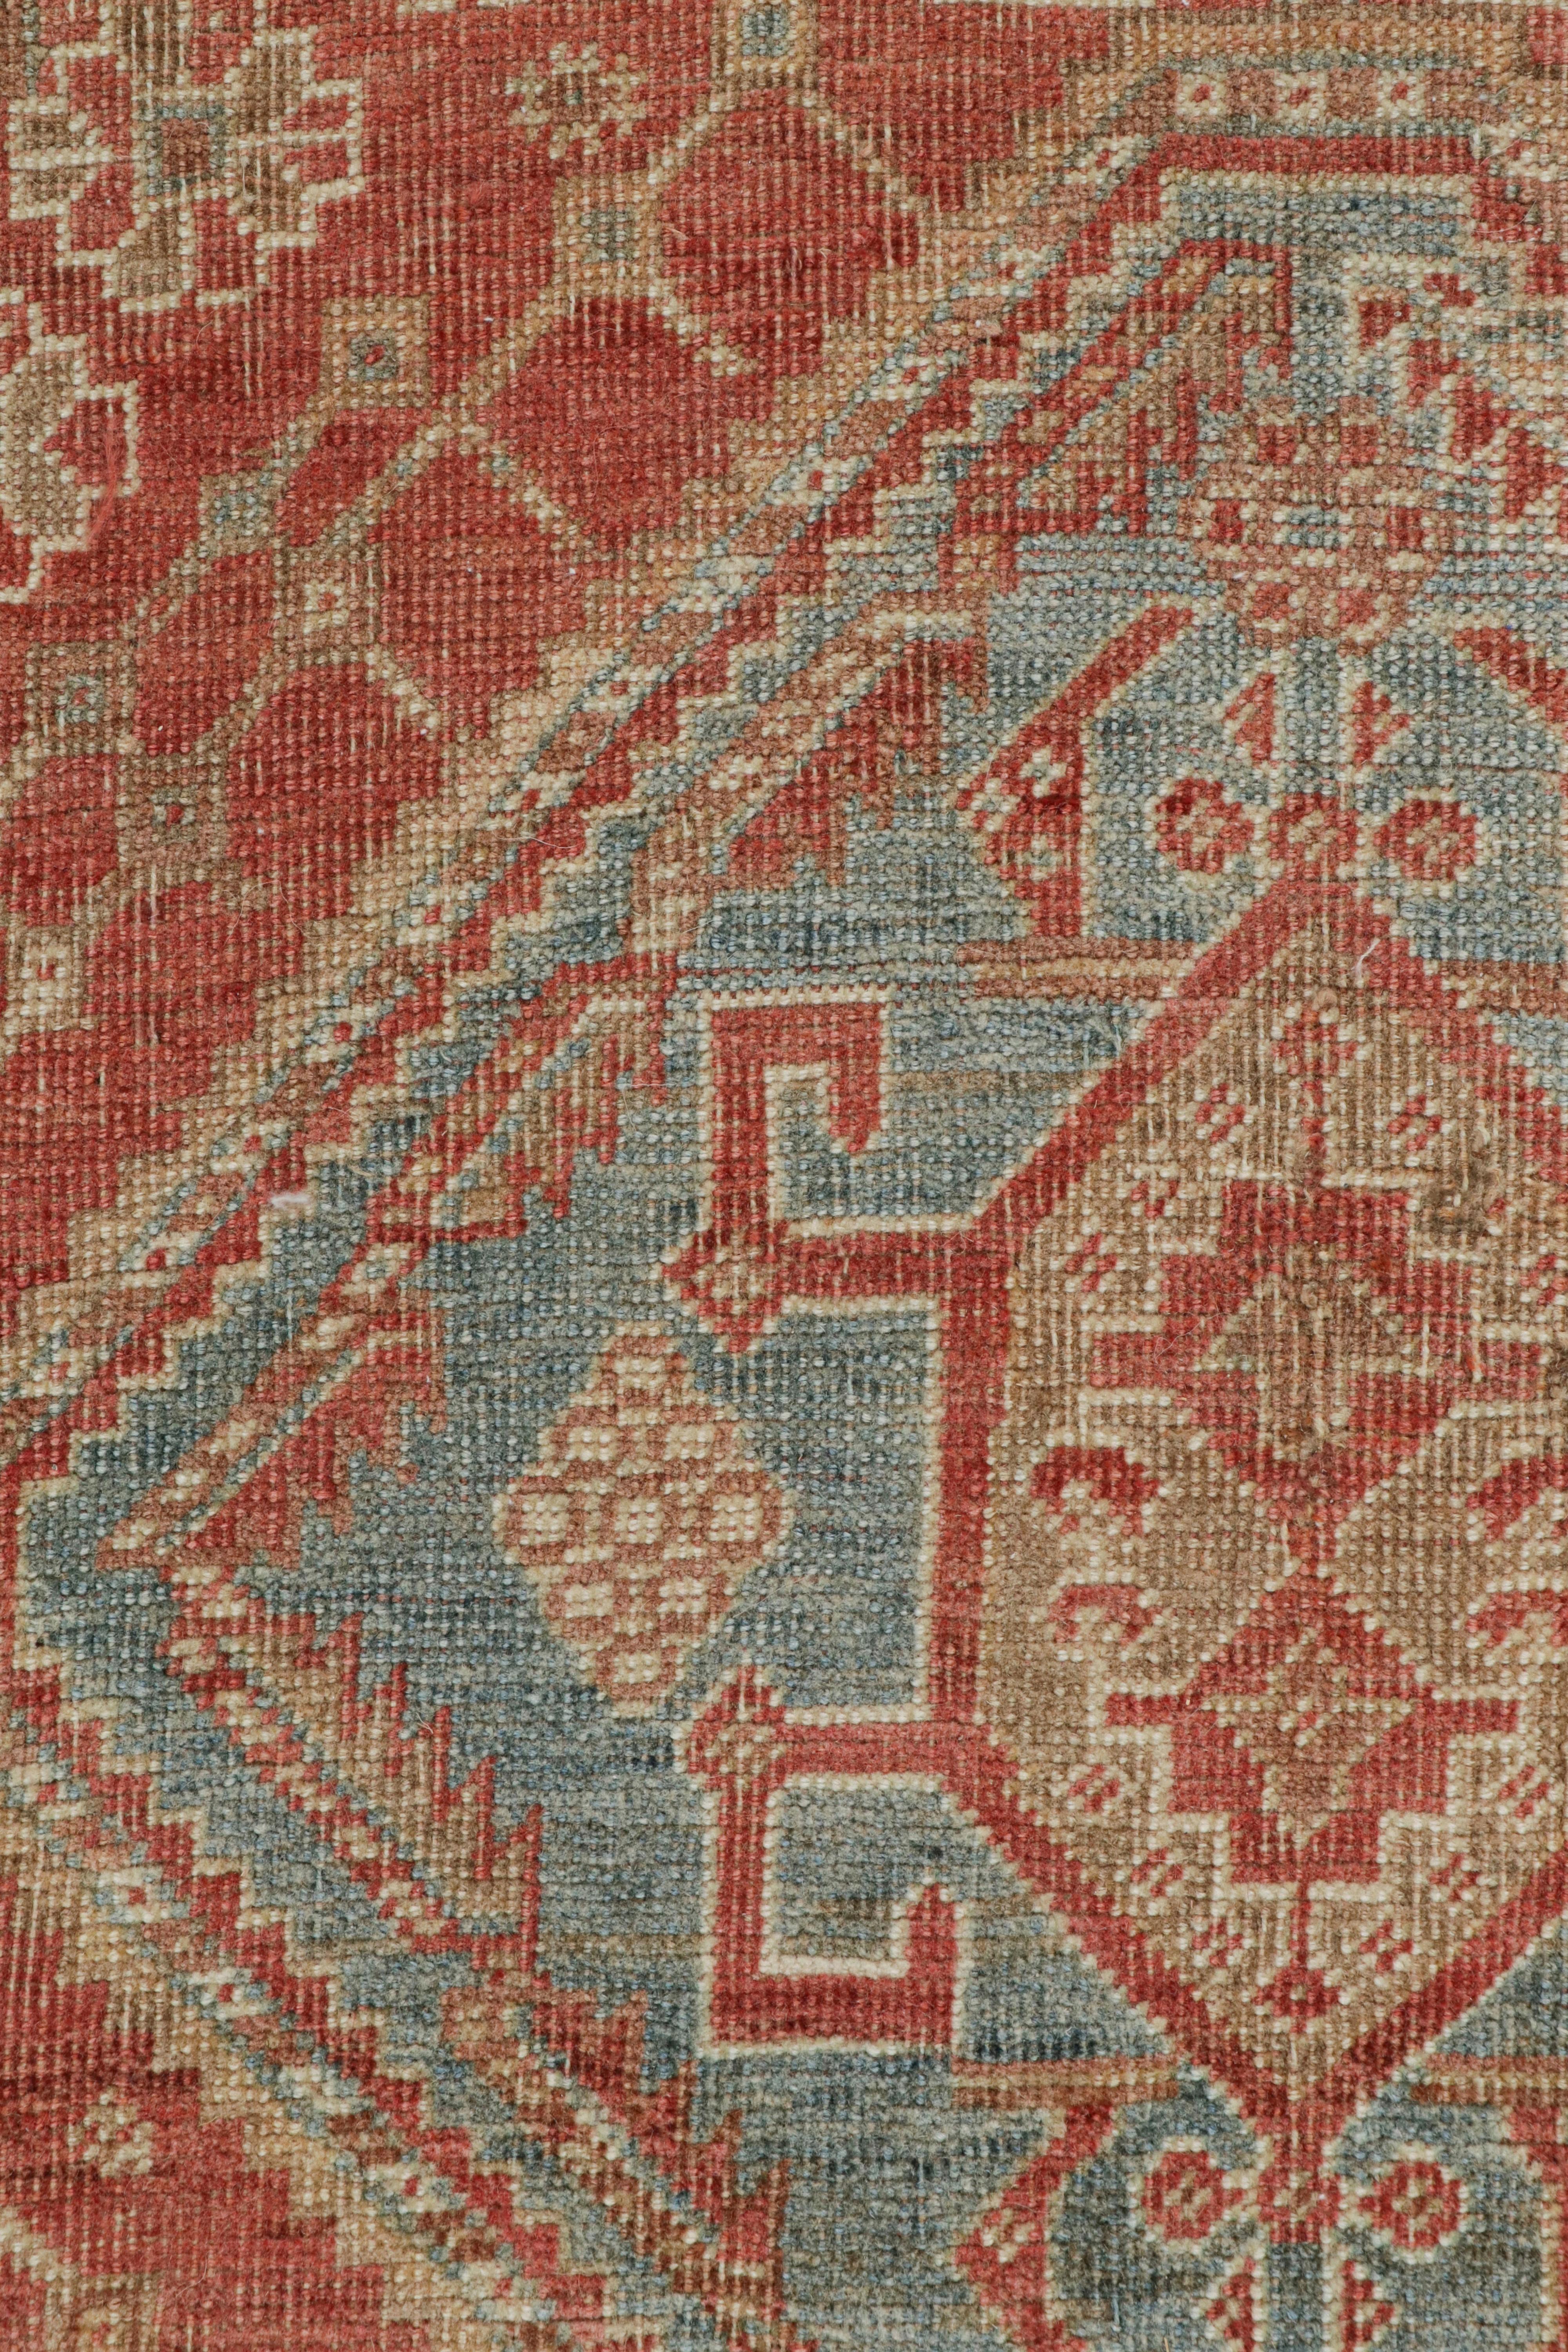 Tribal Vintage Ersari Rug in Red with Blue and Beige-Brown Patterns, from Rug & Kilim For Sale